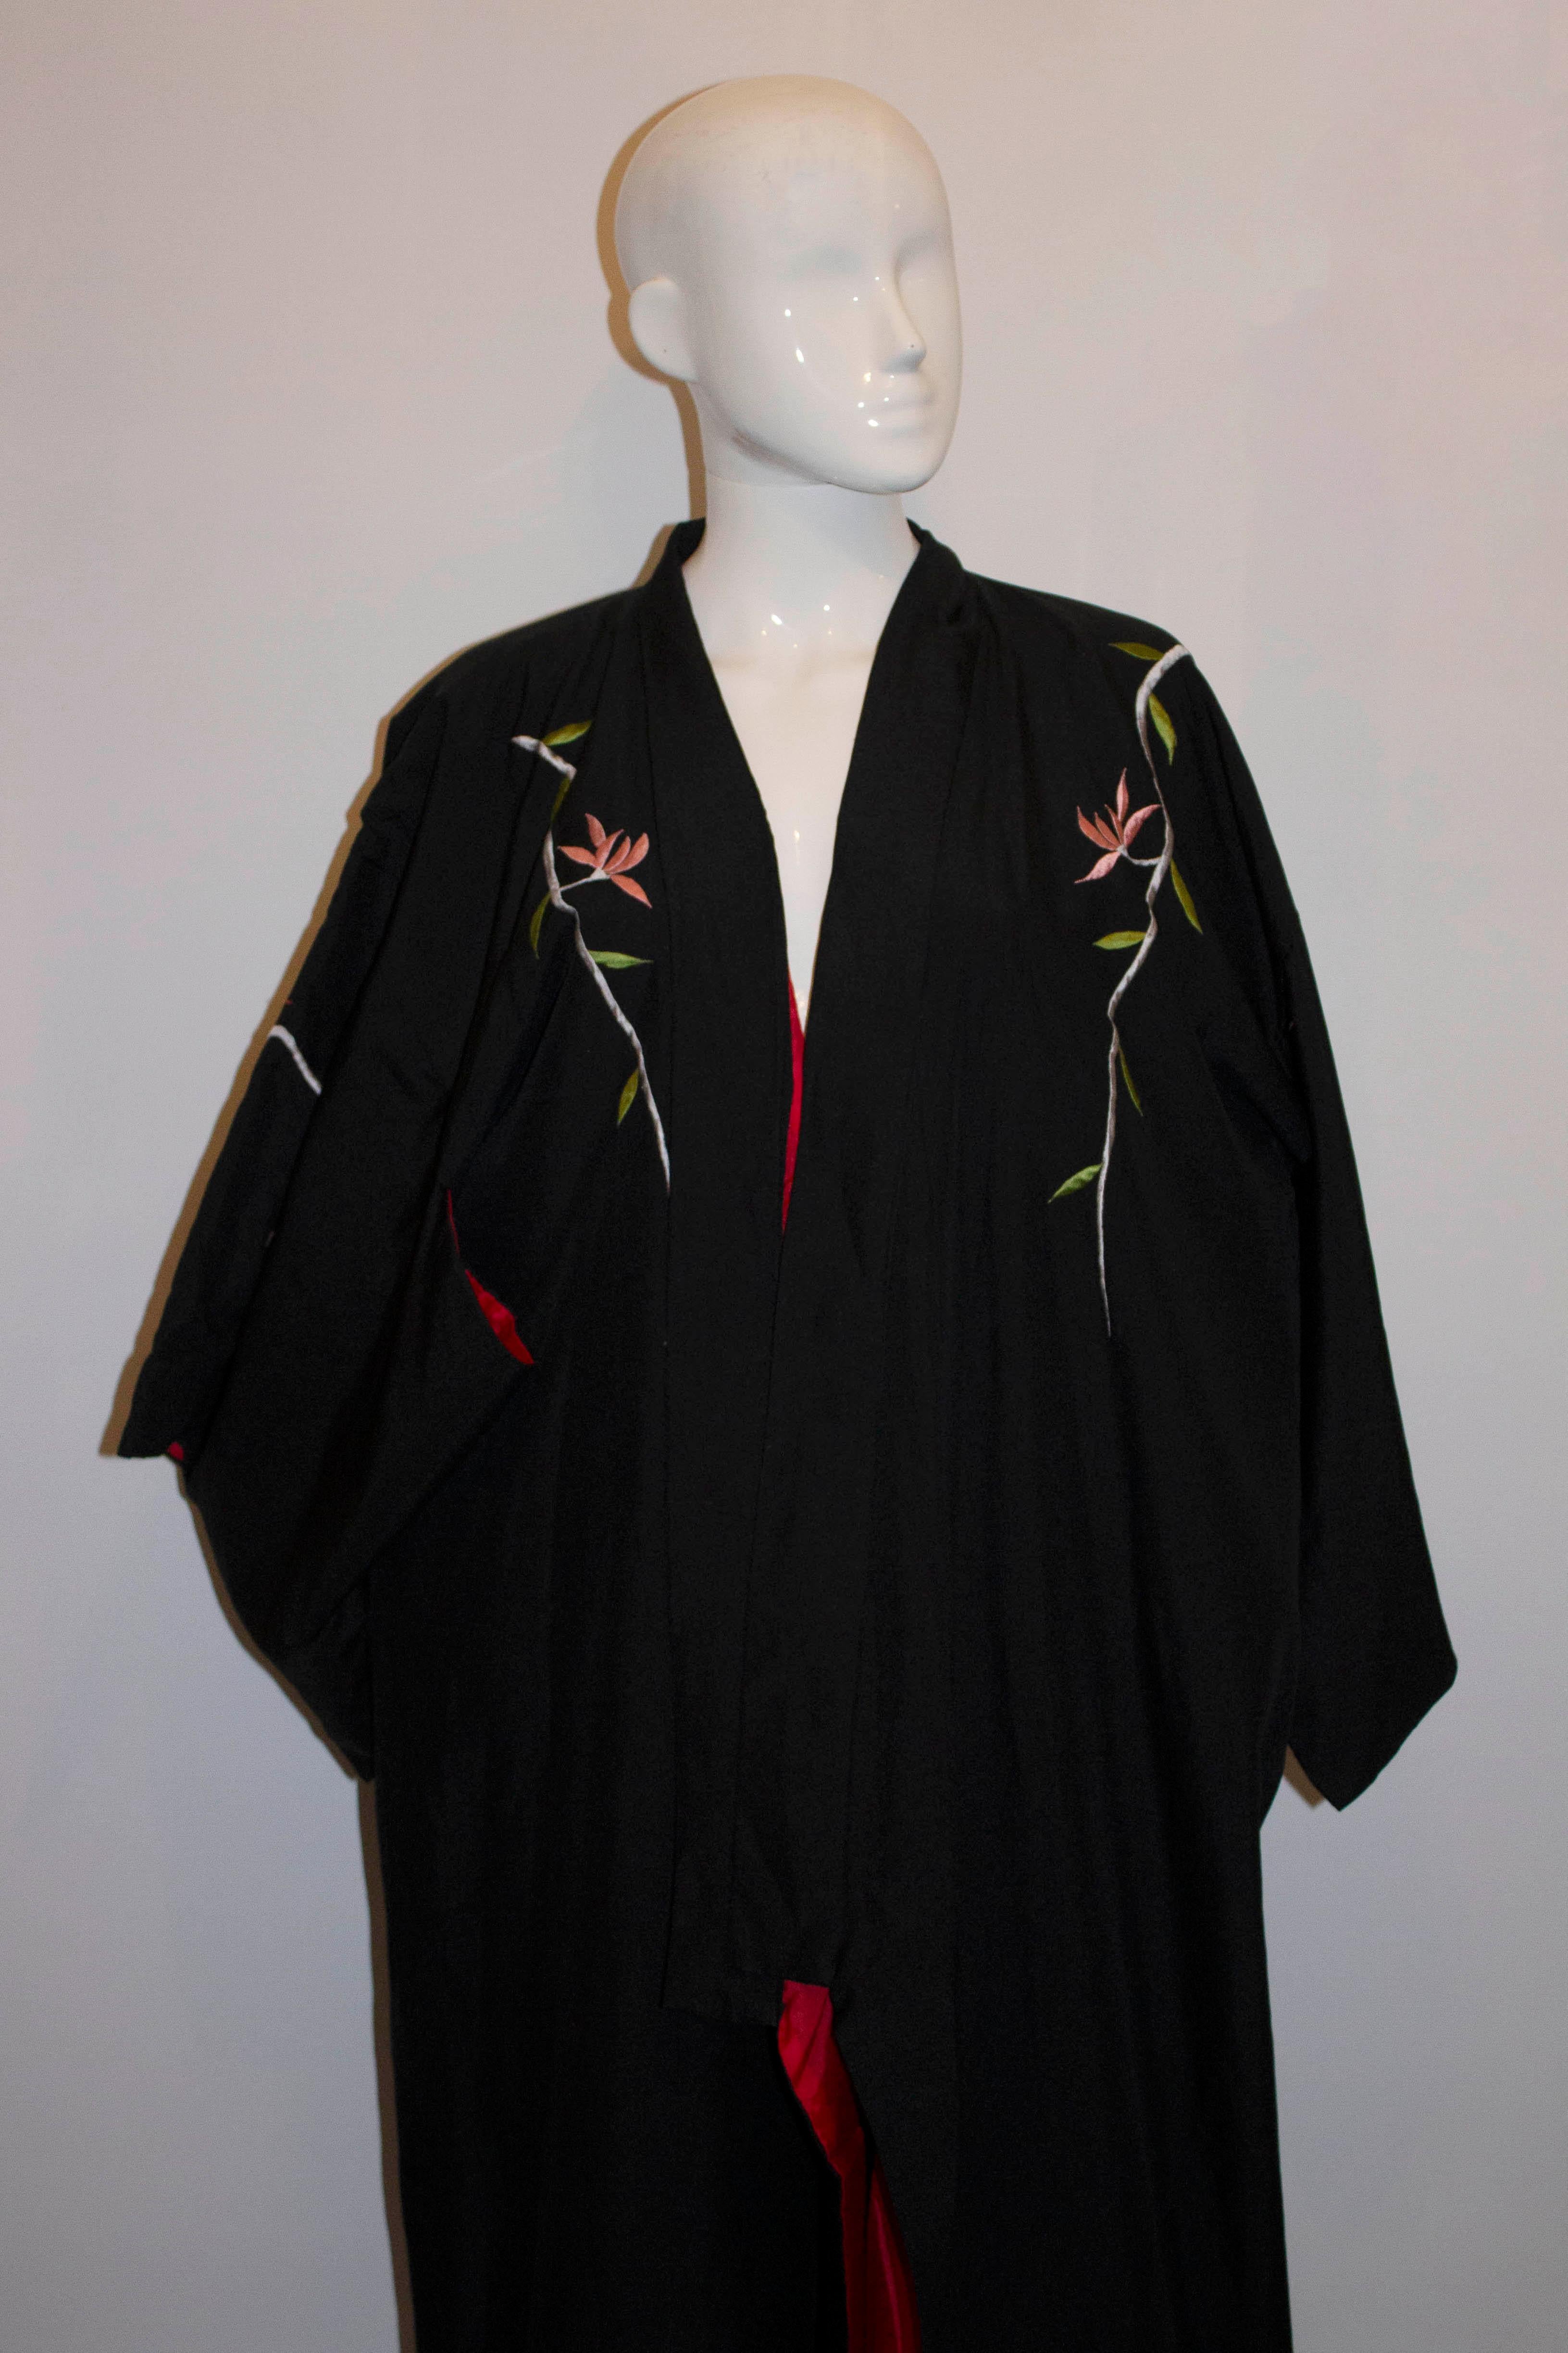 A vintage Japanese kimono, made for the western market. The kimono has wonderful embroidery of a golden phoenix ,which is a symbol of the Empress, alongside symbols of flowers and branches It comes with the orginal tie. Measurements. Length 61''